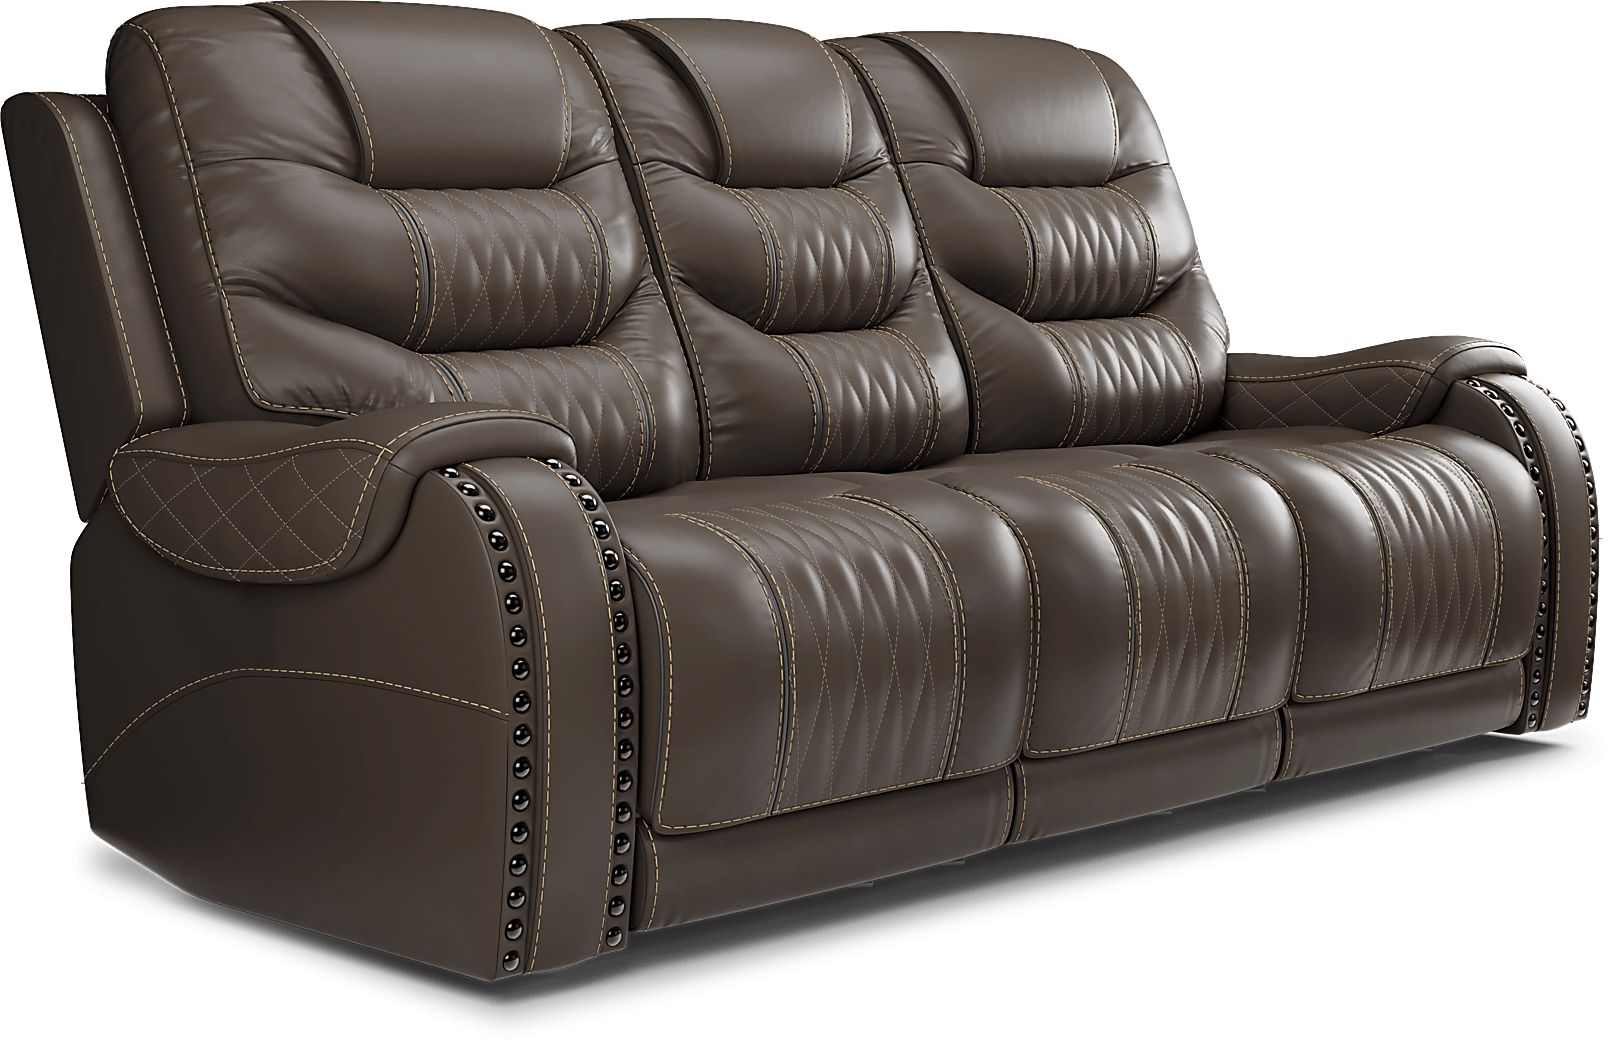 Eric Church Highway To Home Headliner Brown Leather 5 Pc Living Room with Reclining Sofa